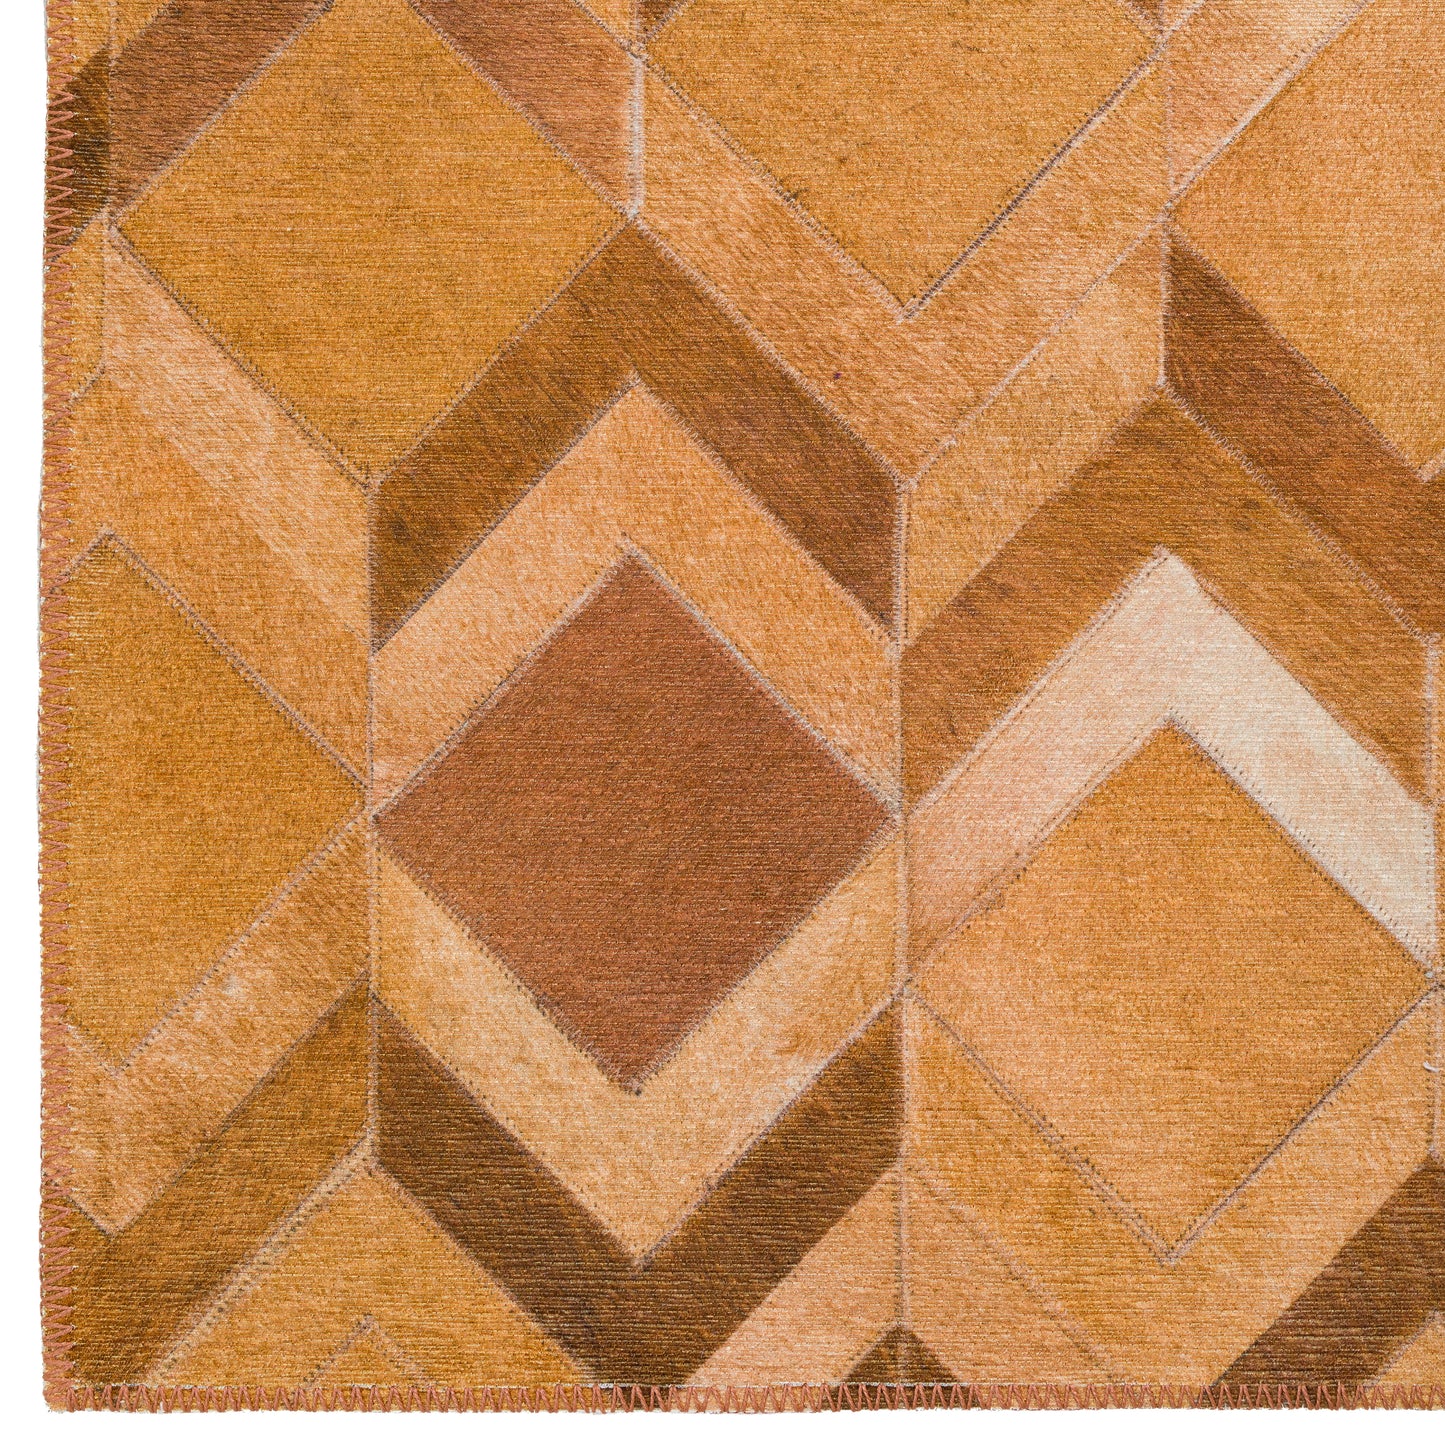 Stetson SS5 Machine Made Synthetic Blend Indoor Area Rug by Dalyn Rugs